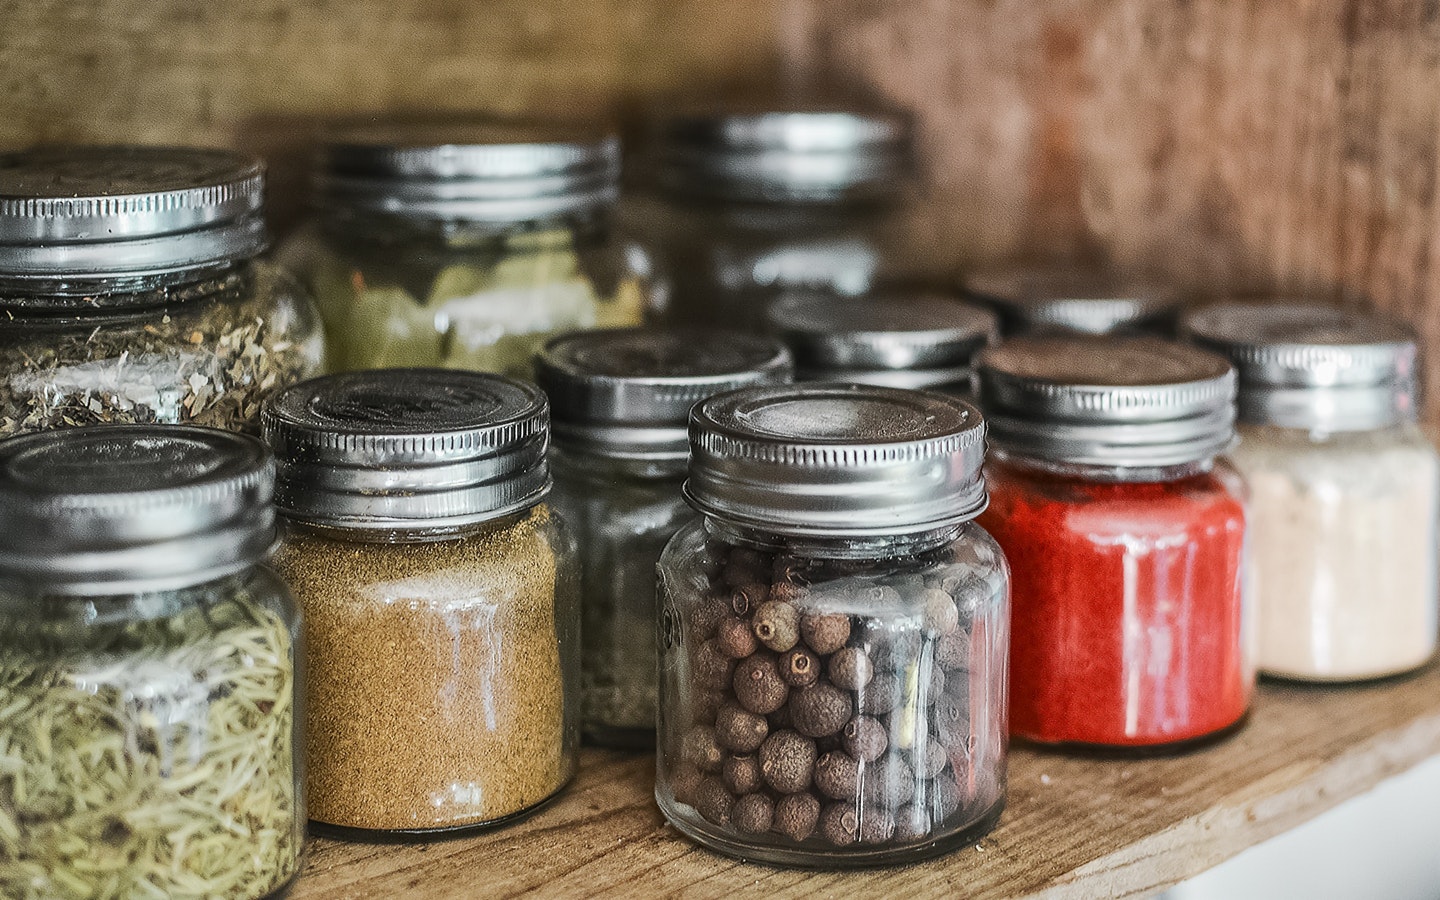 one of the most used kitchen space saving hacks is using the storage jars